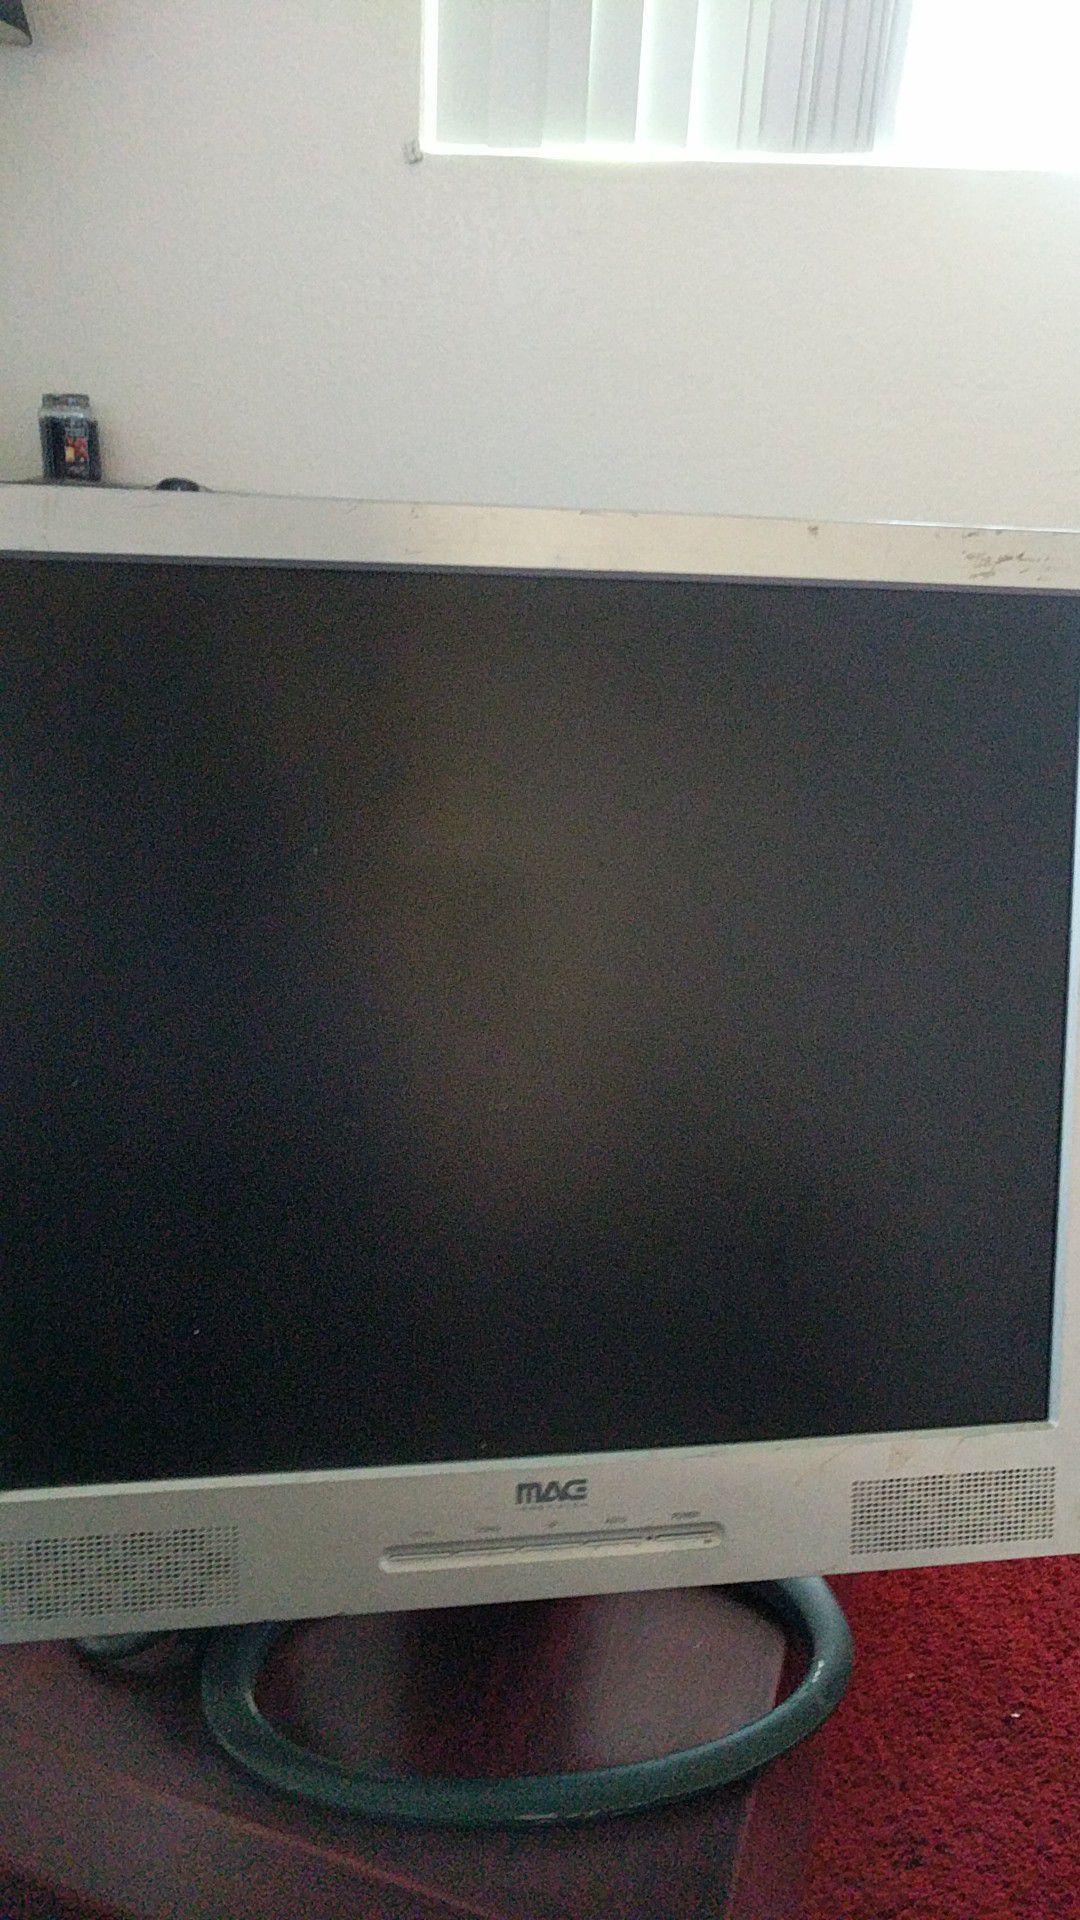 Computer Monitor with built-in Speakers